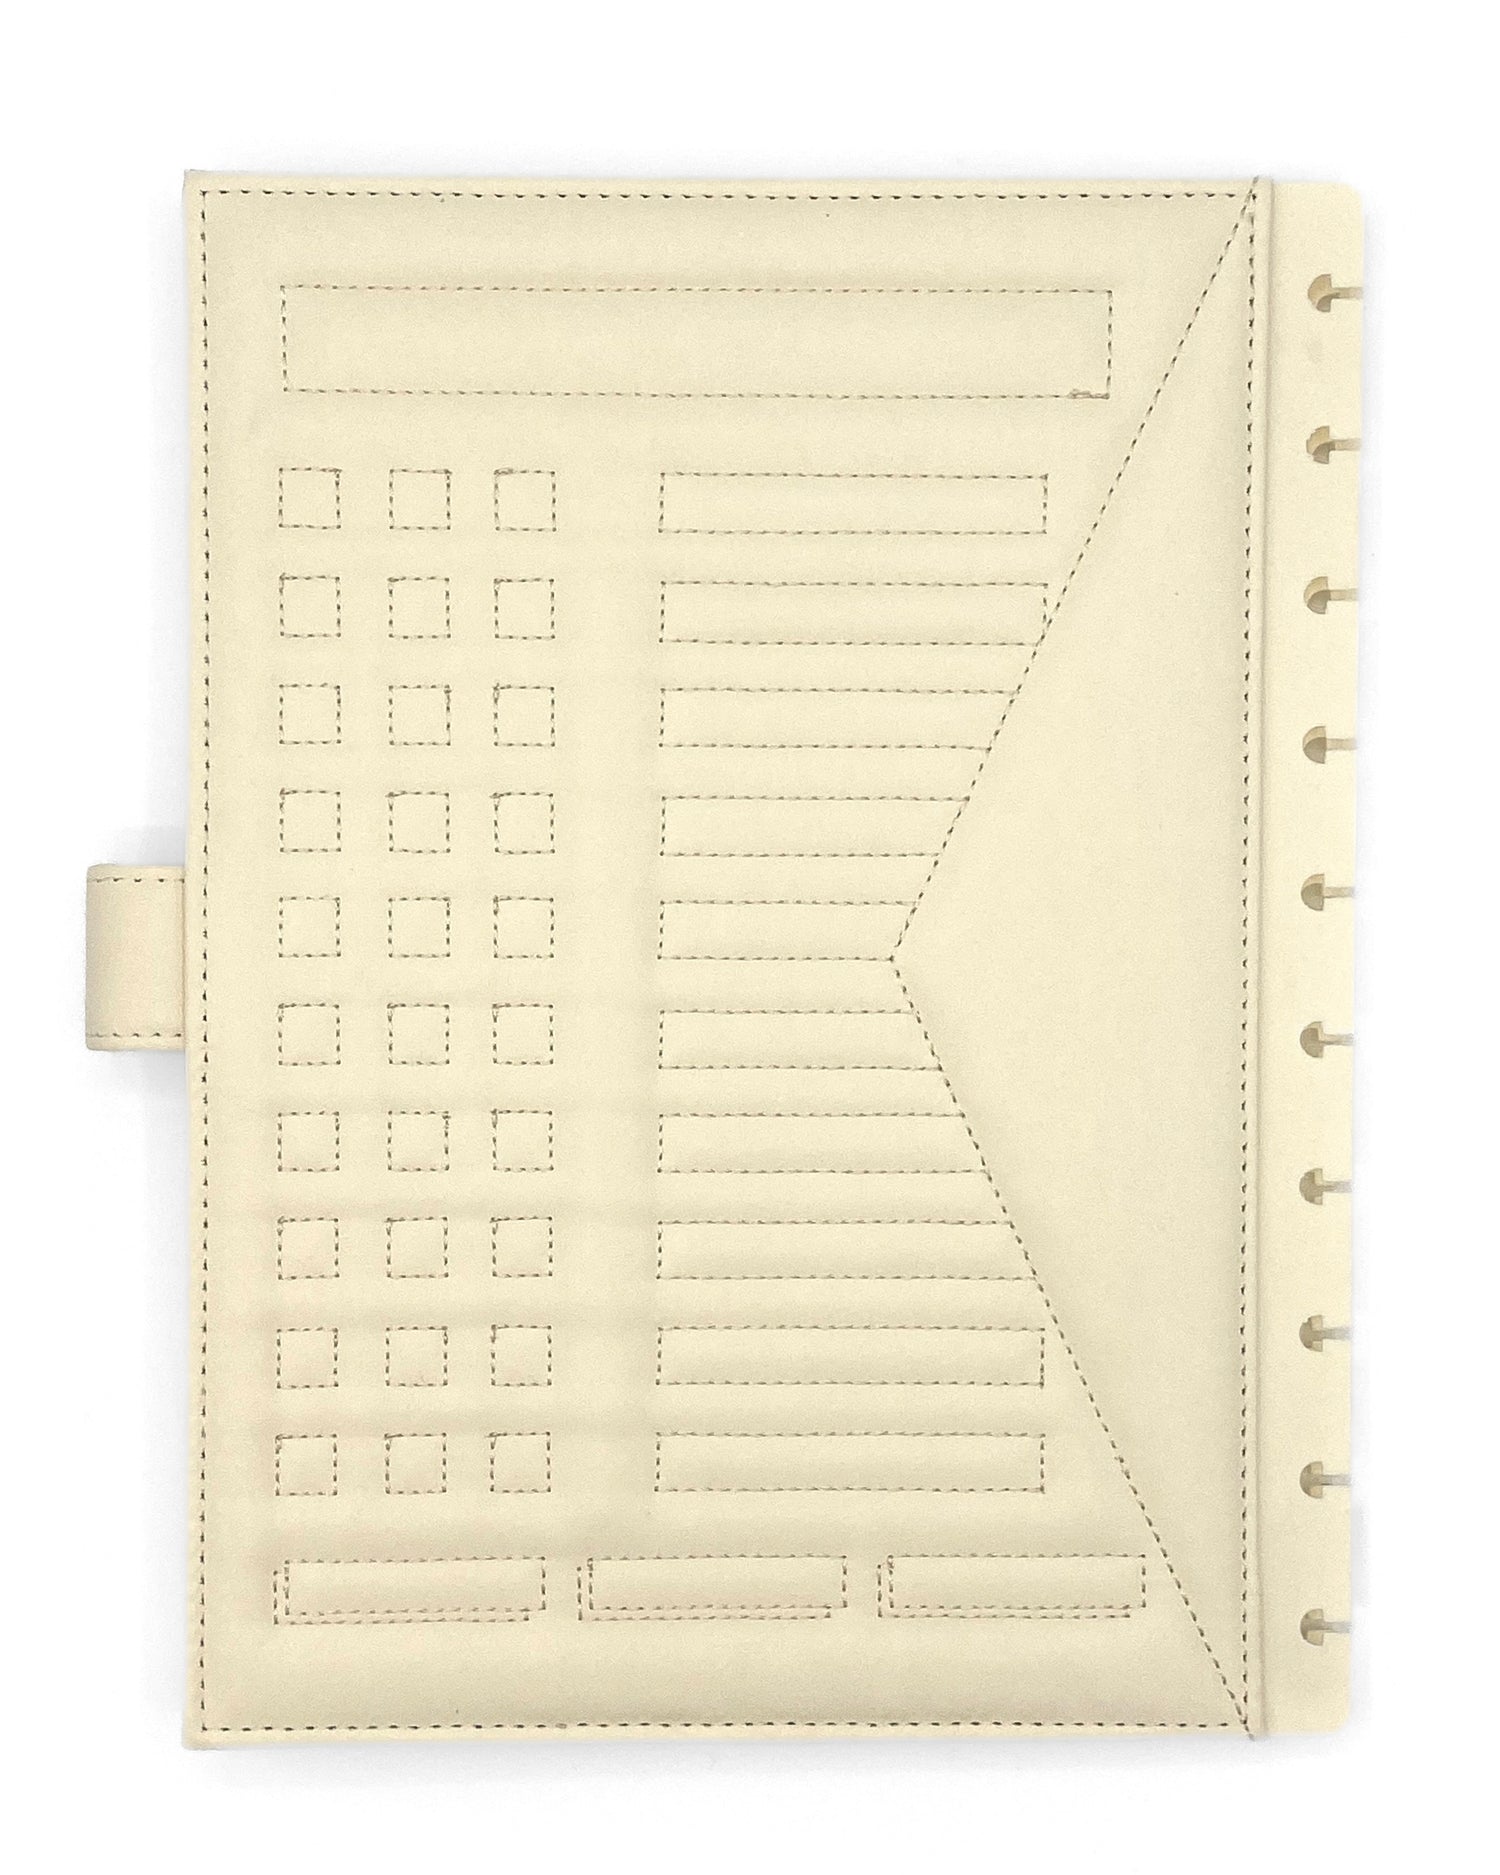 Back cover of cream faux leather planner